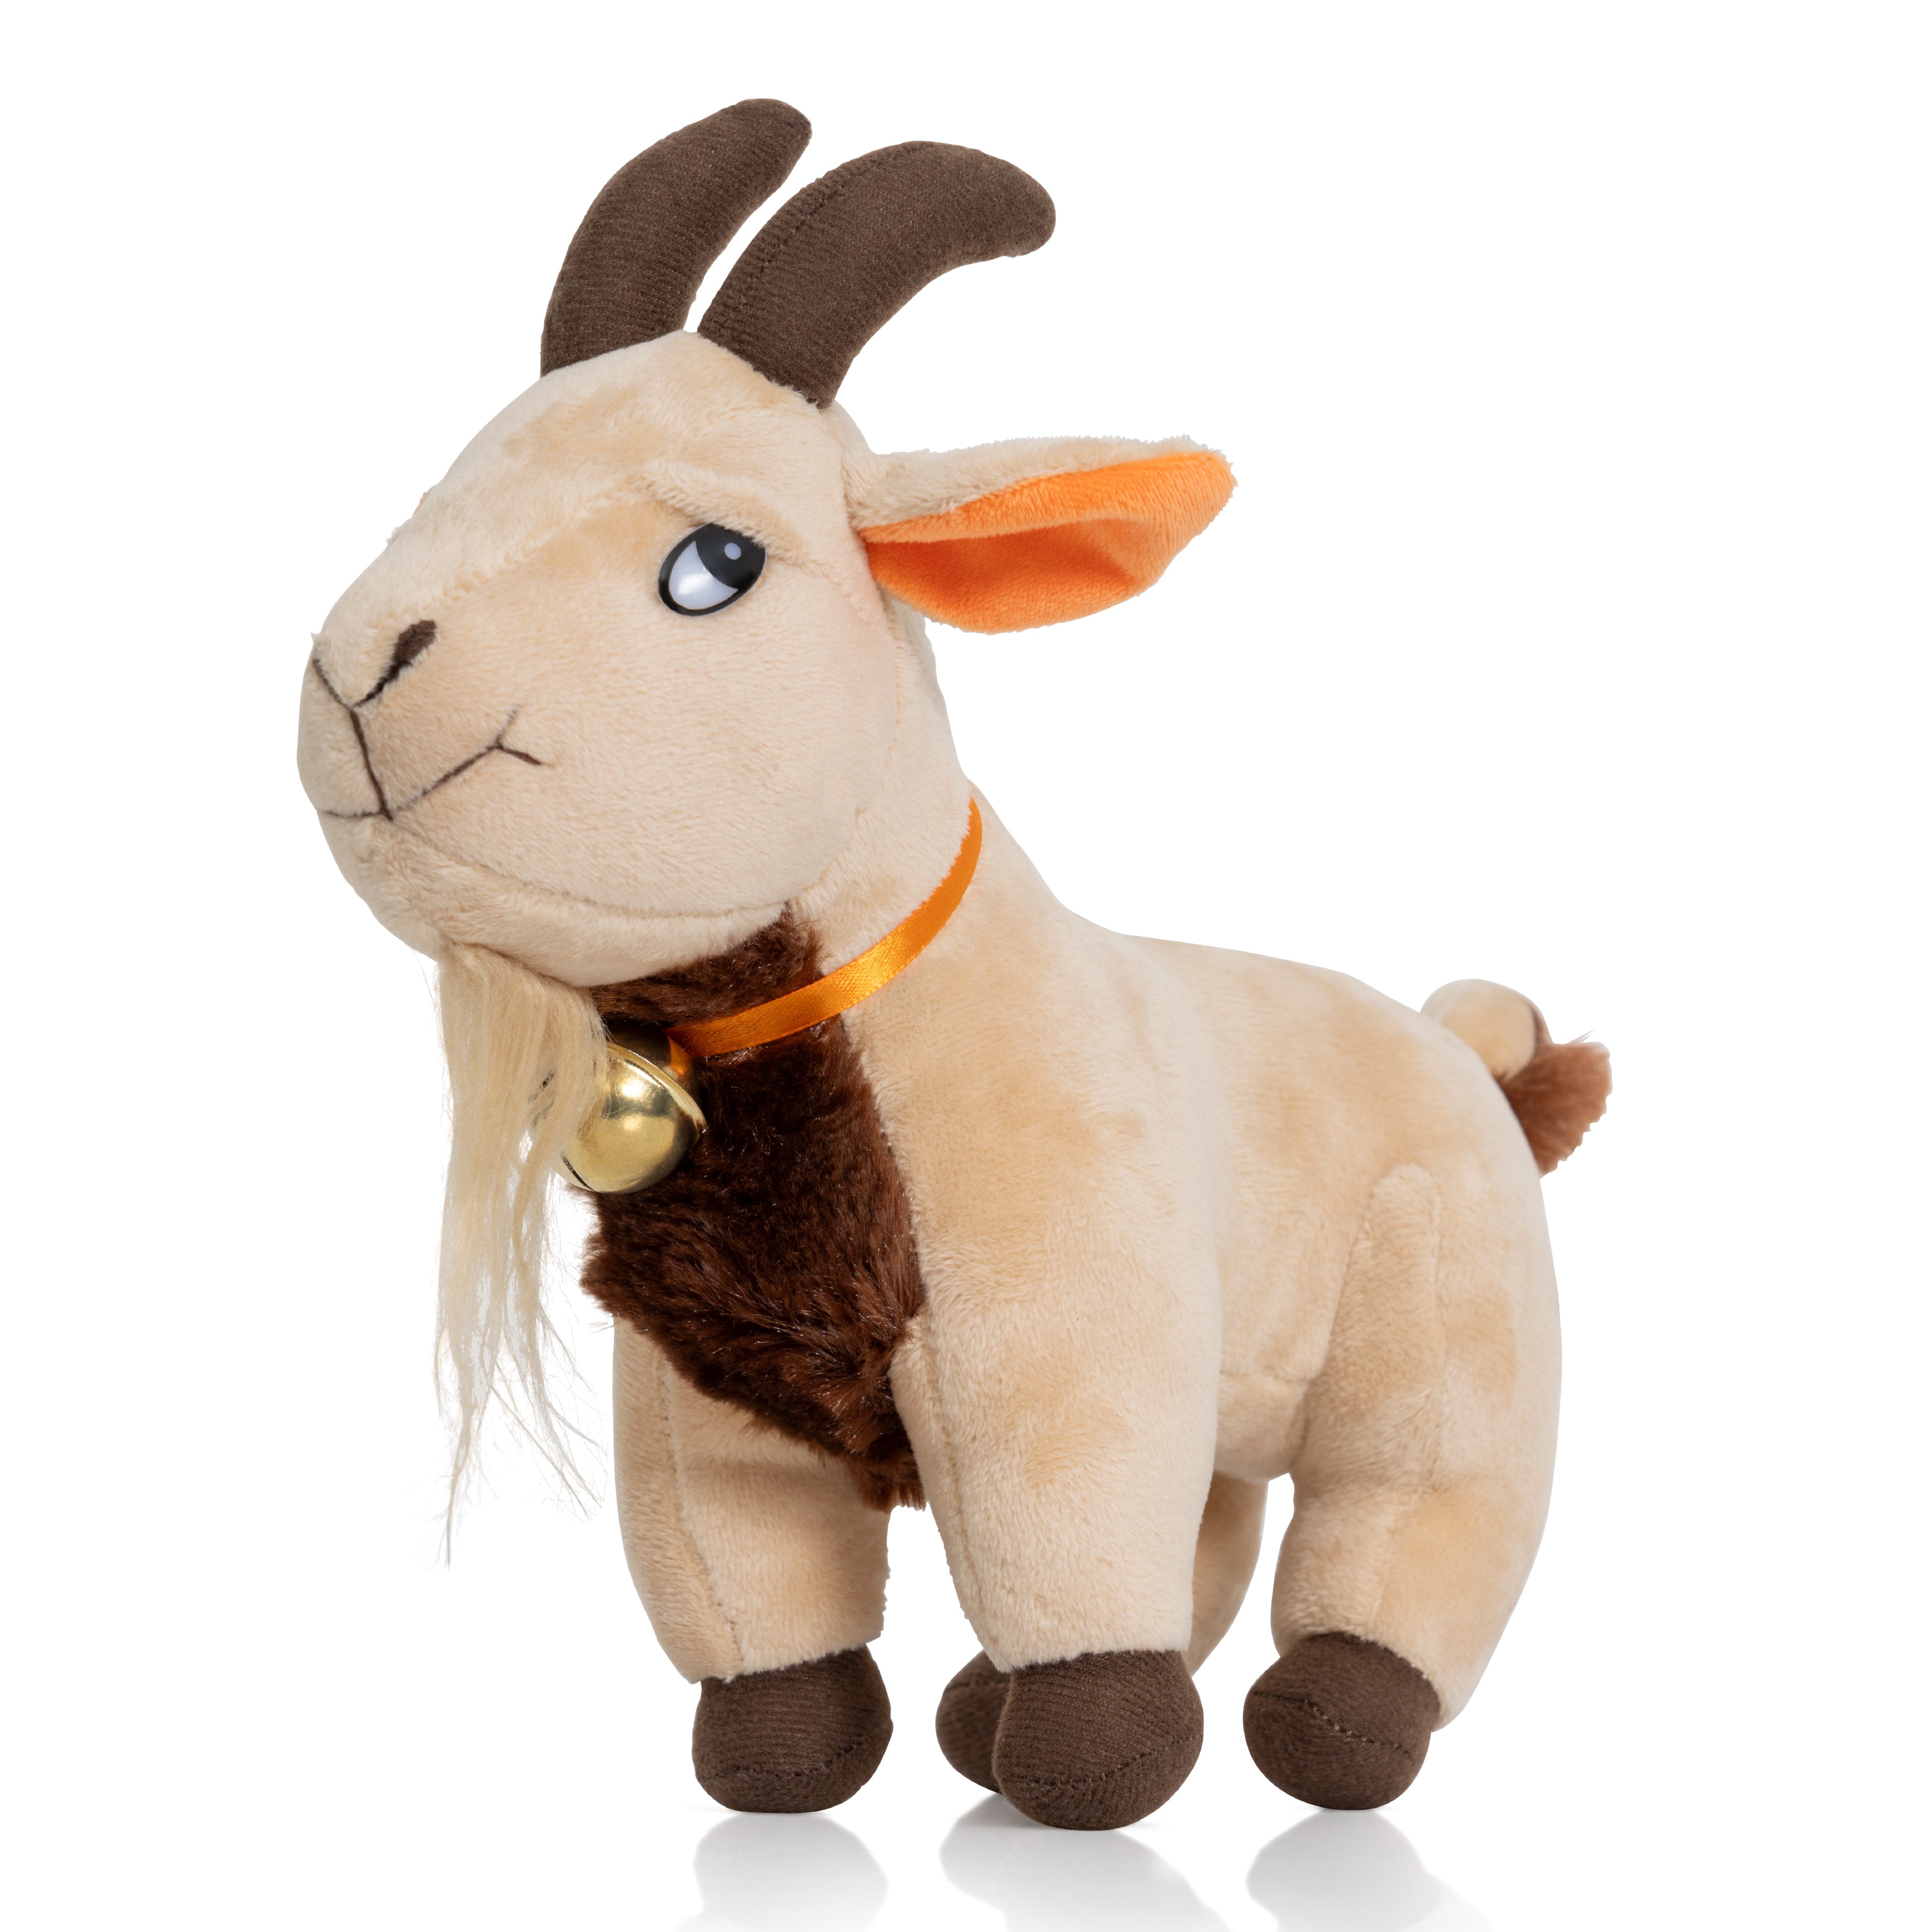 Screaming Goat Toy – 11” Plush Desk Toy Makes Hilarious Screaming Sound - Funny Gag Gift for Friends and Coworkers